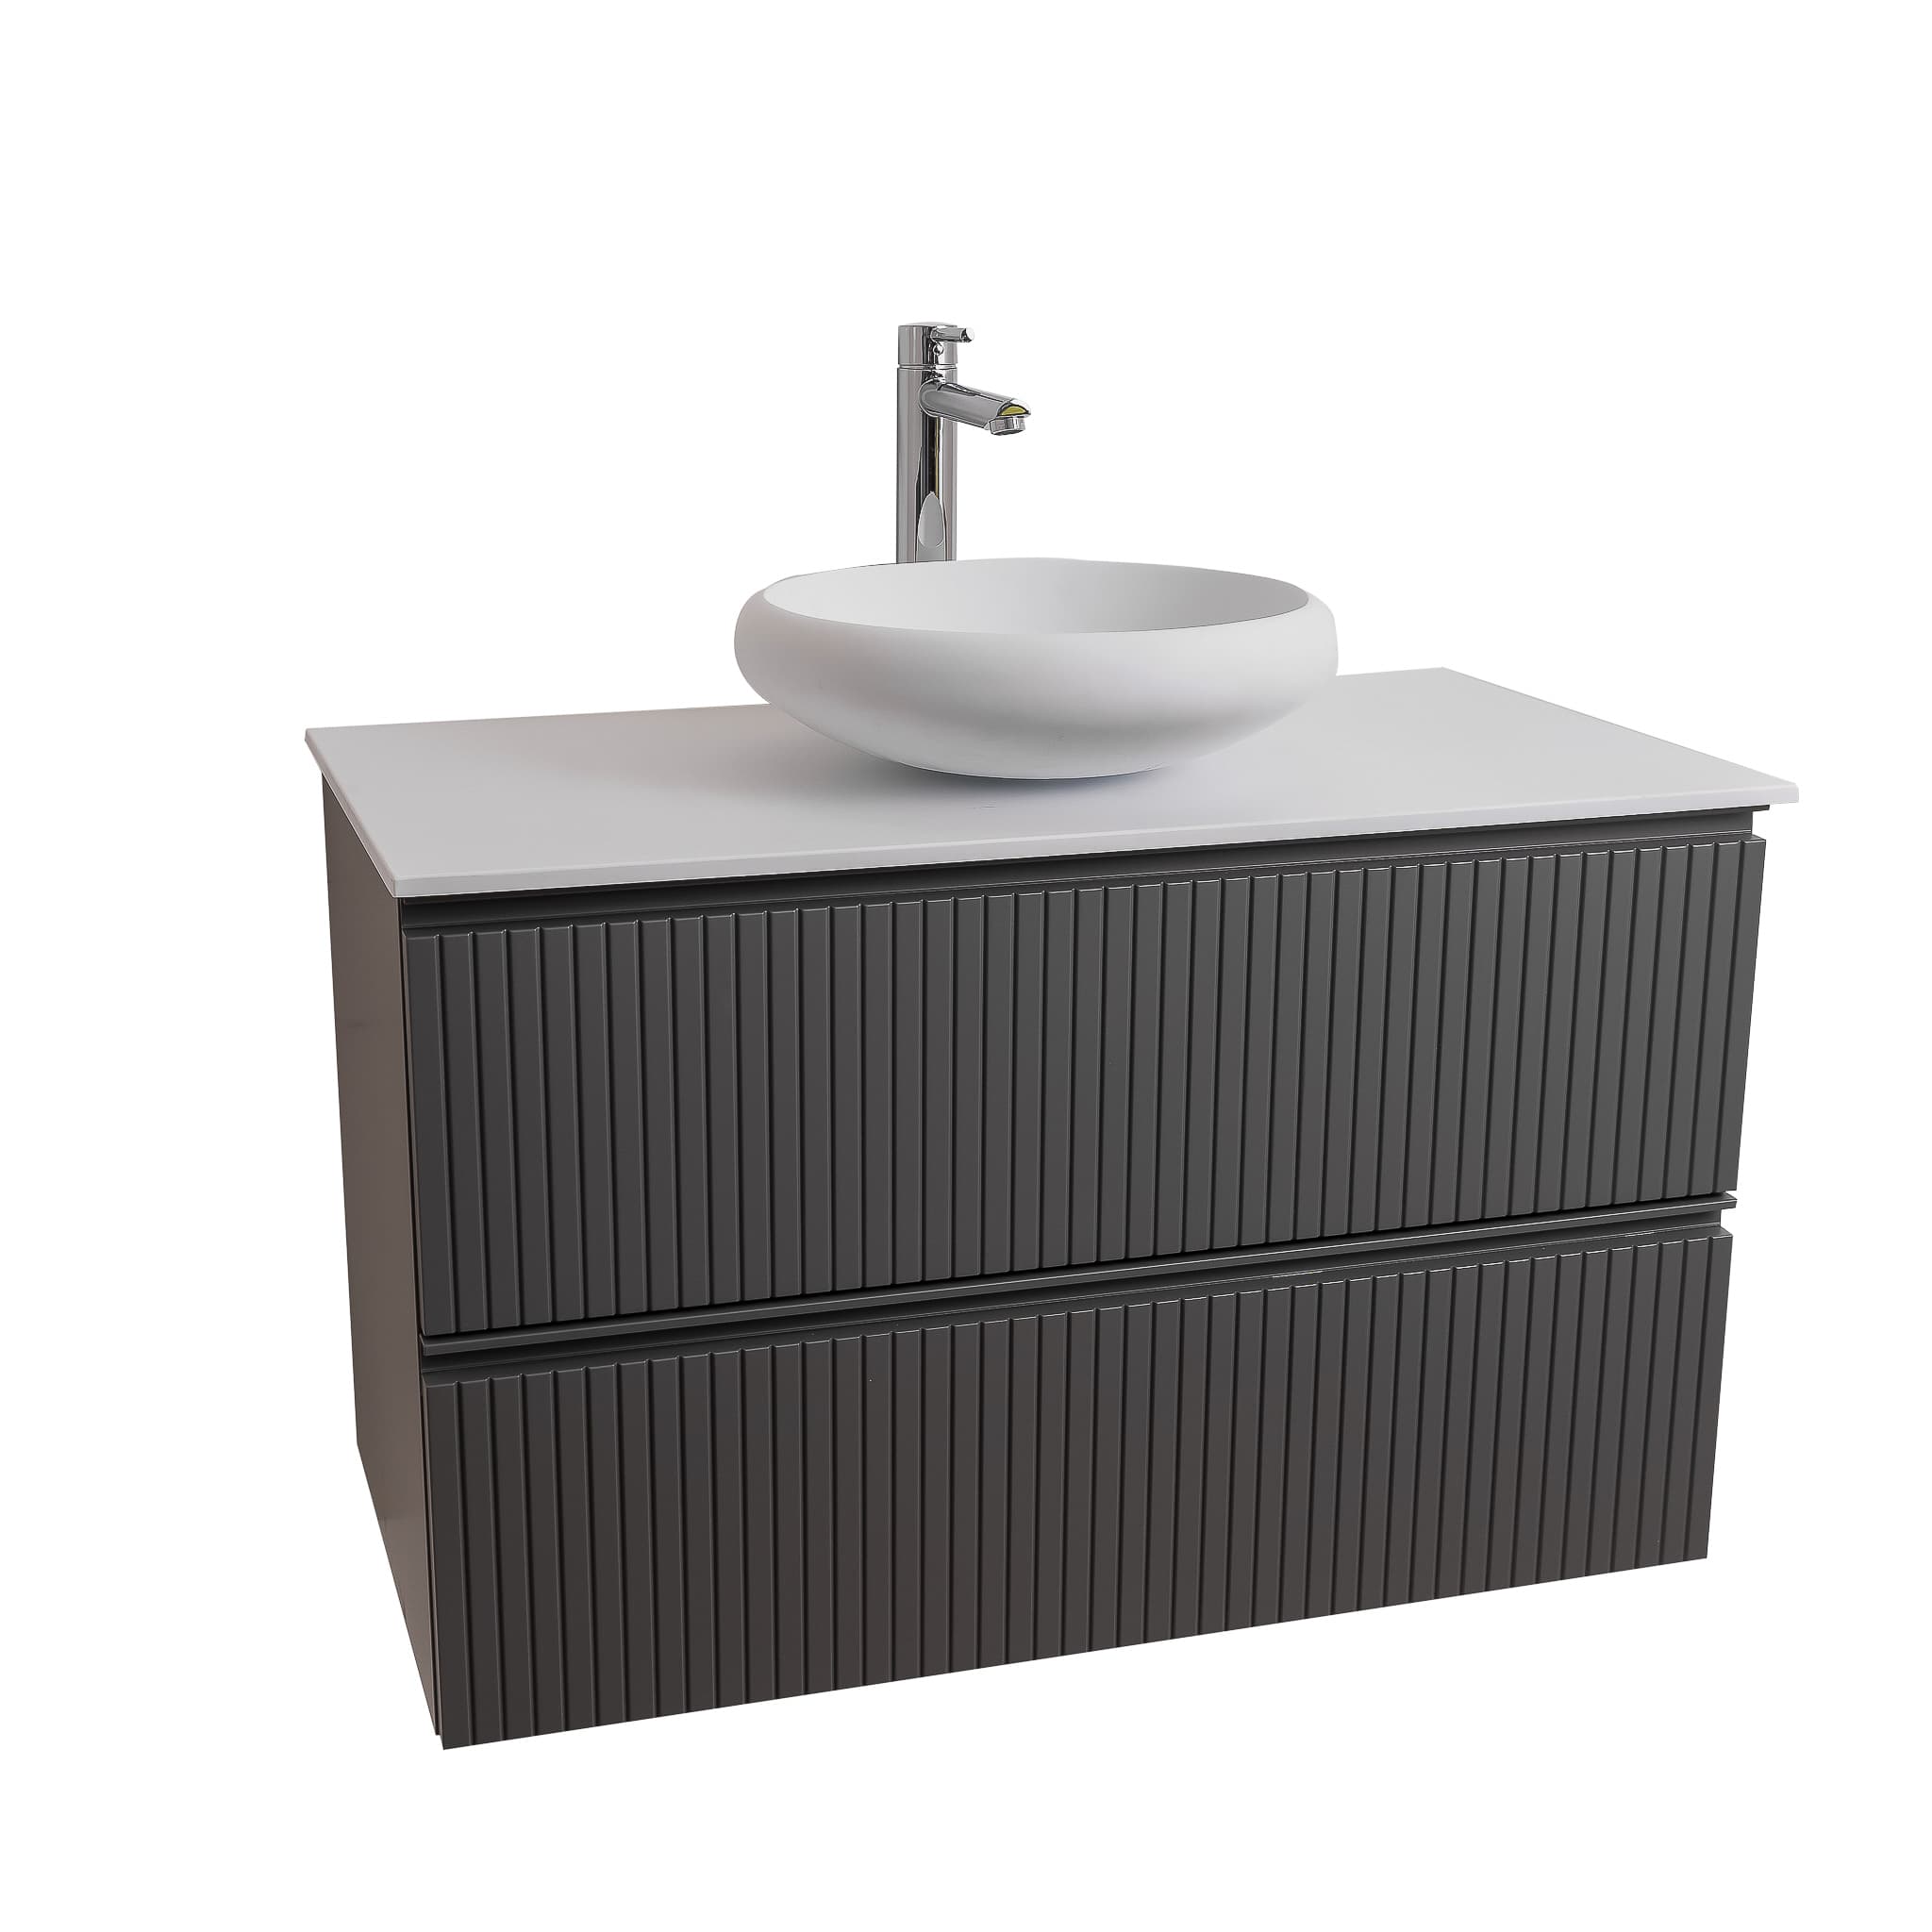 Ares 35.5 Matte Grey Cabinet, Solid Surface Flat White Counter And Round Solid Surface White Basin 1153, Wall Mounted Modern Vanity Set